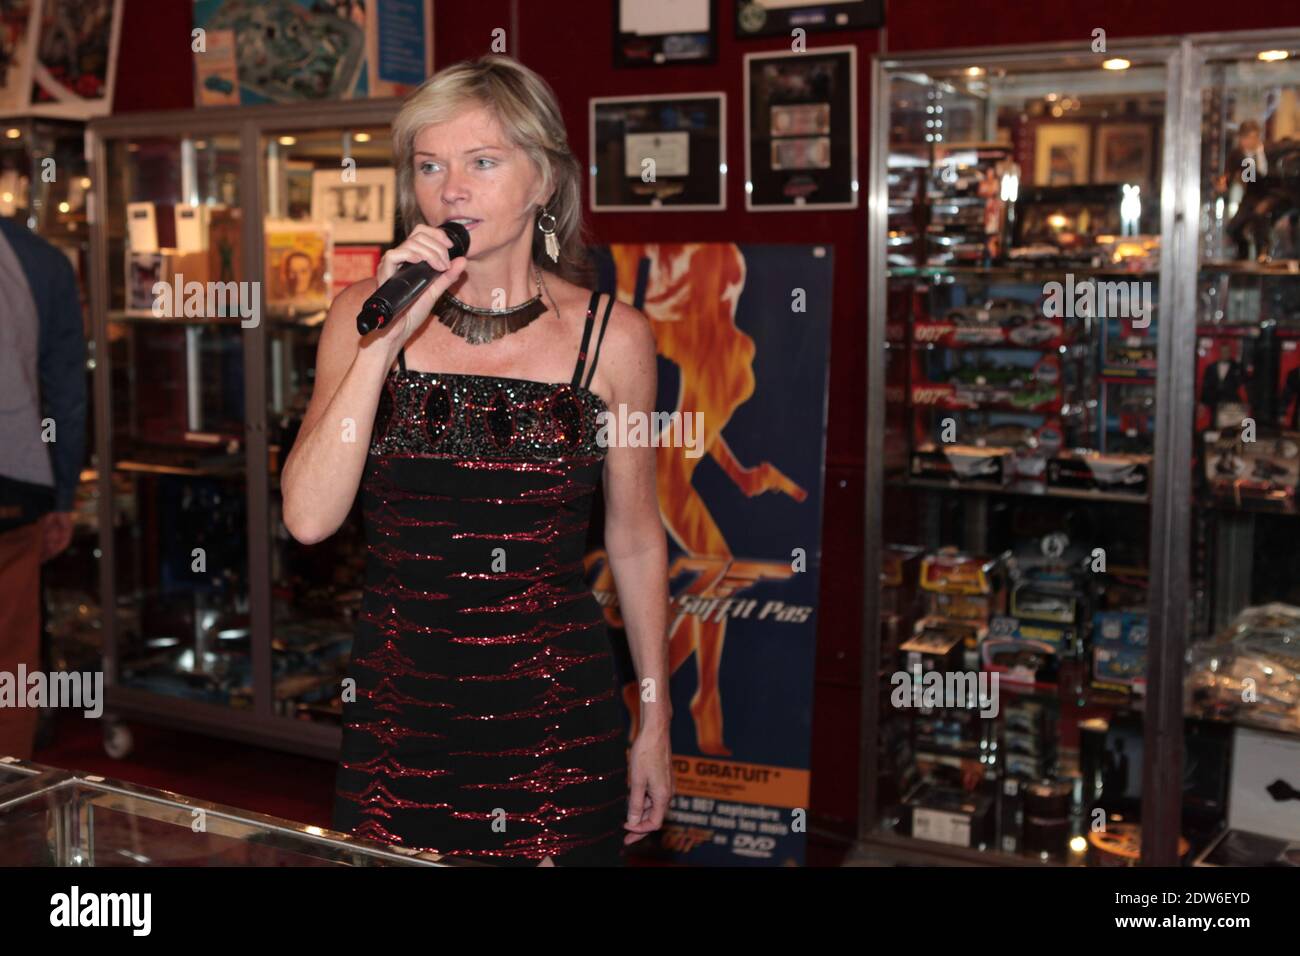 Exclusive. Former James Bond Girl Polish-born French actress Irka Bochenko ('Moonraker, 1979) performs live at a press preview of film memorabilia including James Bond items ahead of an auction, at Hotel Drouot in Paris, France on May 17, 2014. Photo by Audrey Poree/ABACAPRESS.COM Stock Photo